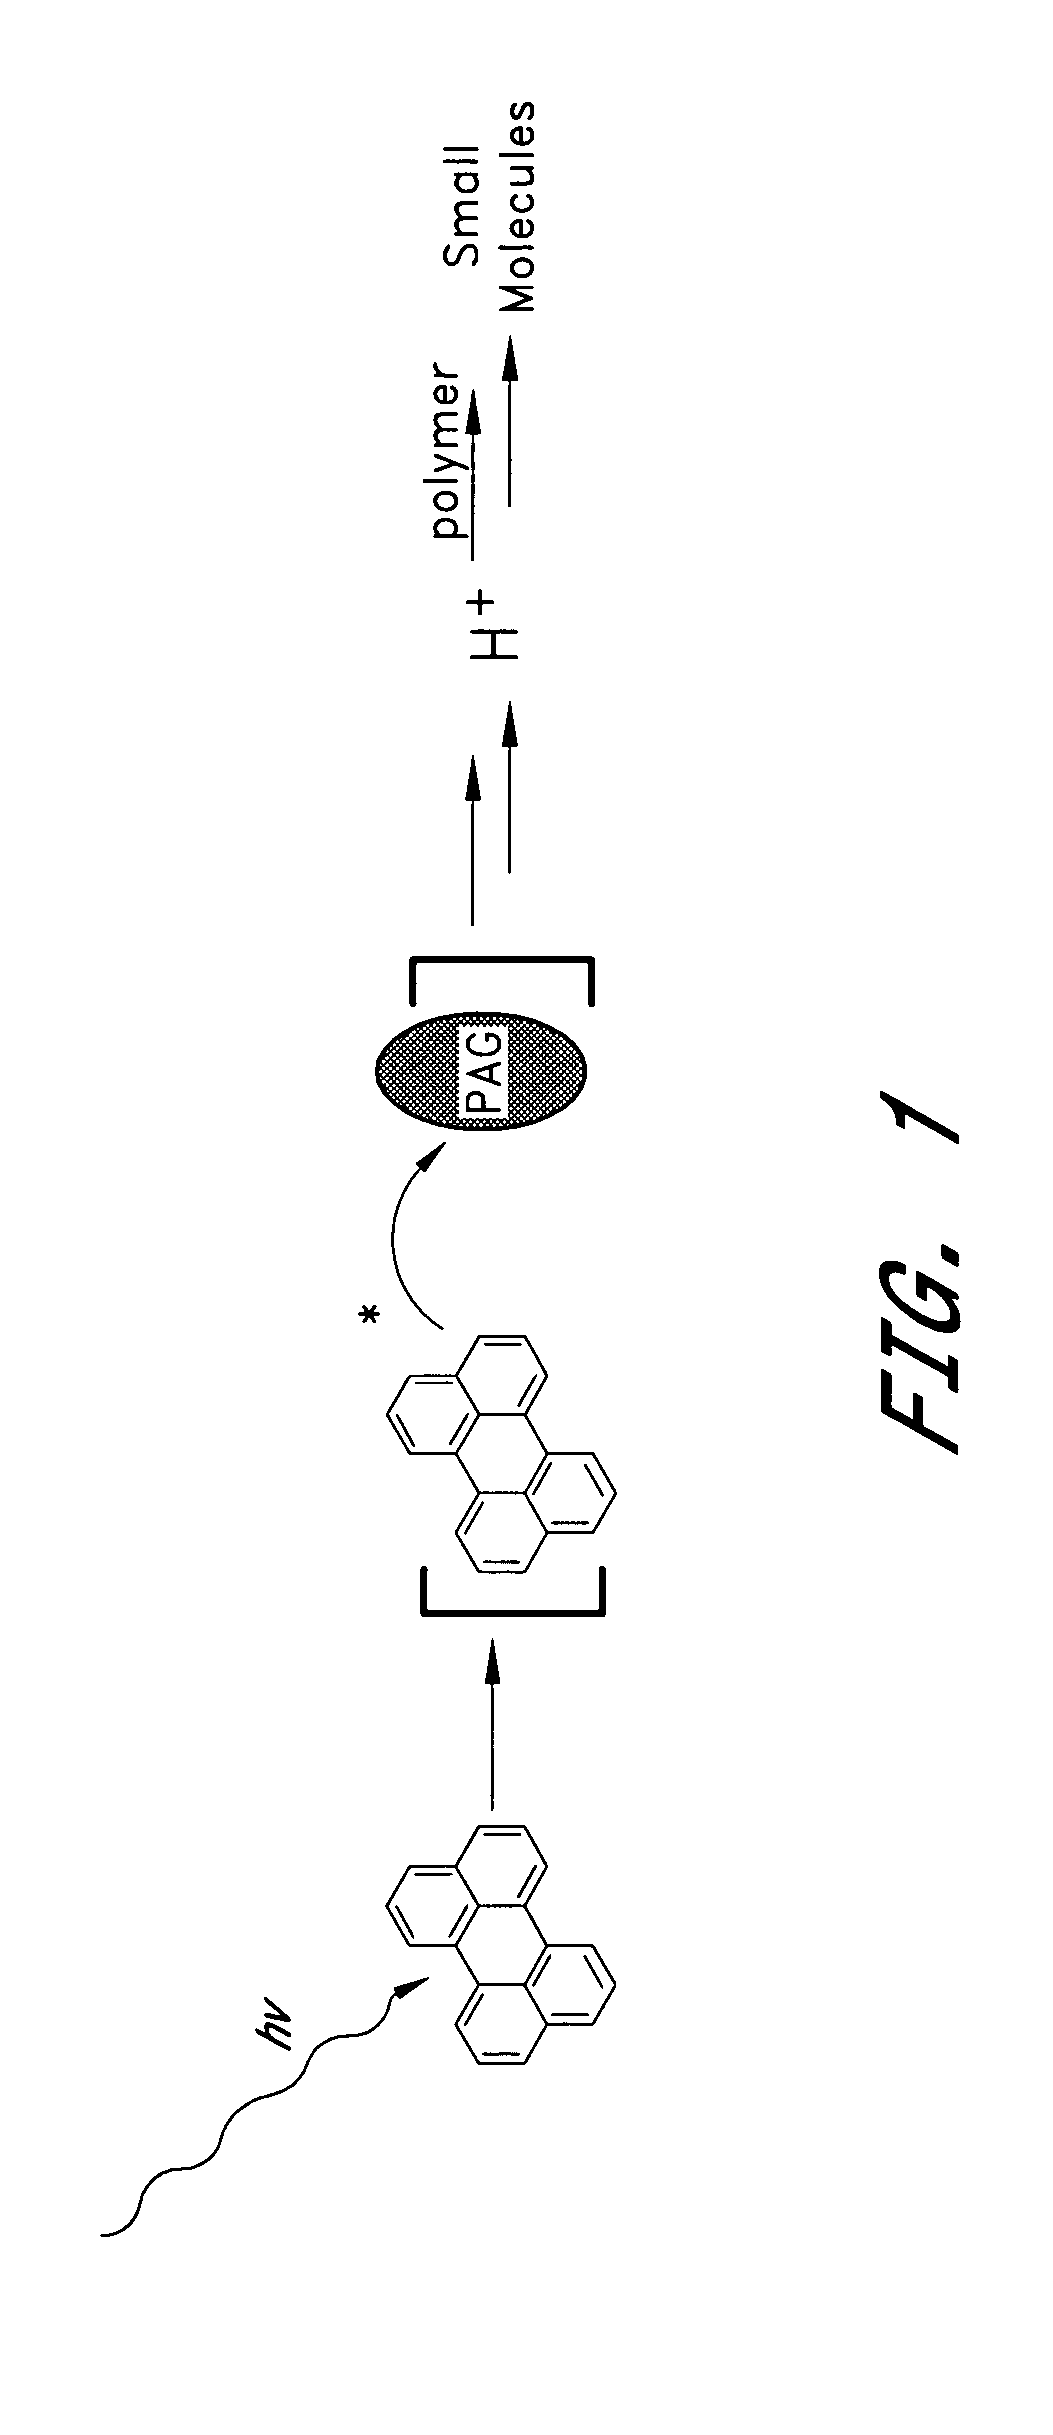 Photocleavable DNA transfer agent